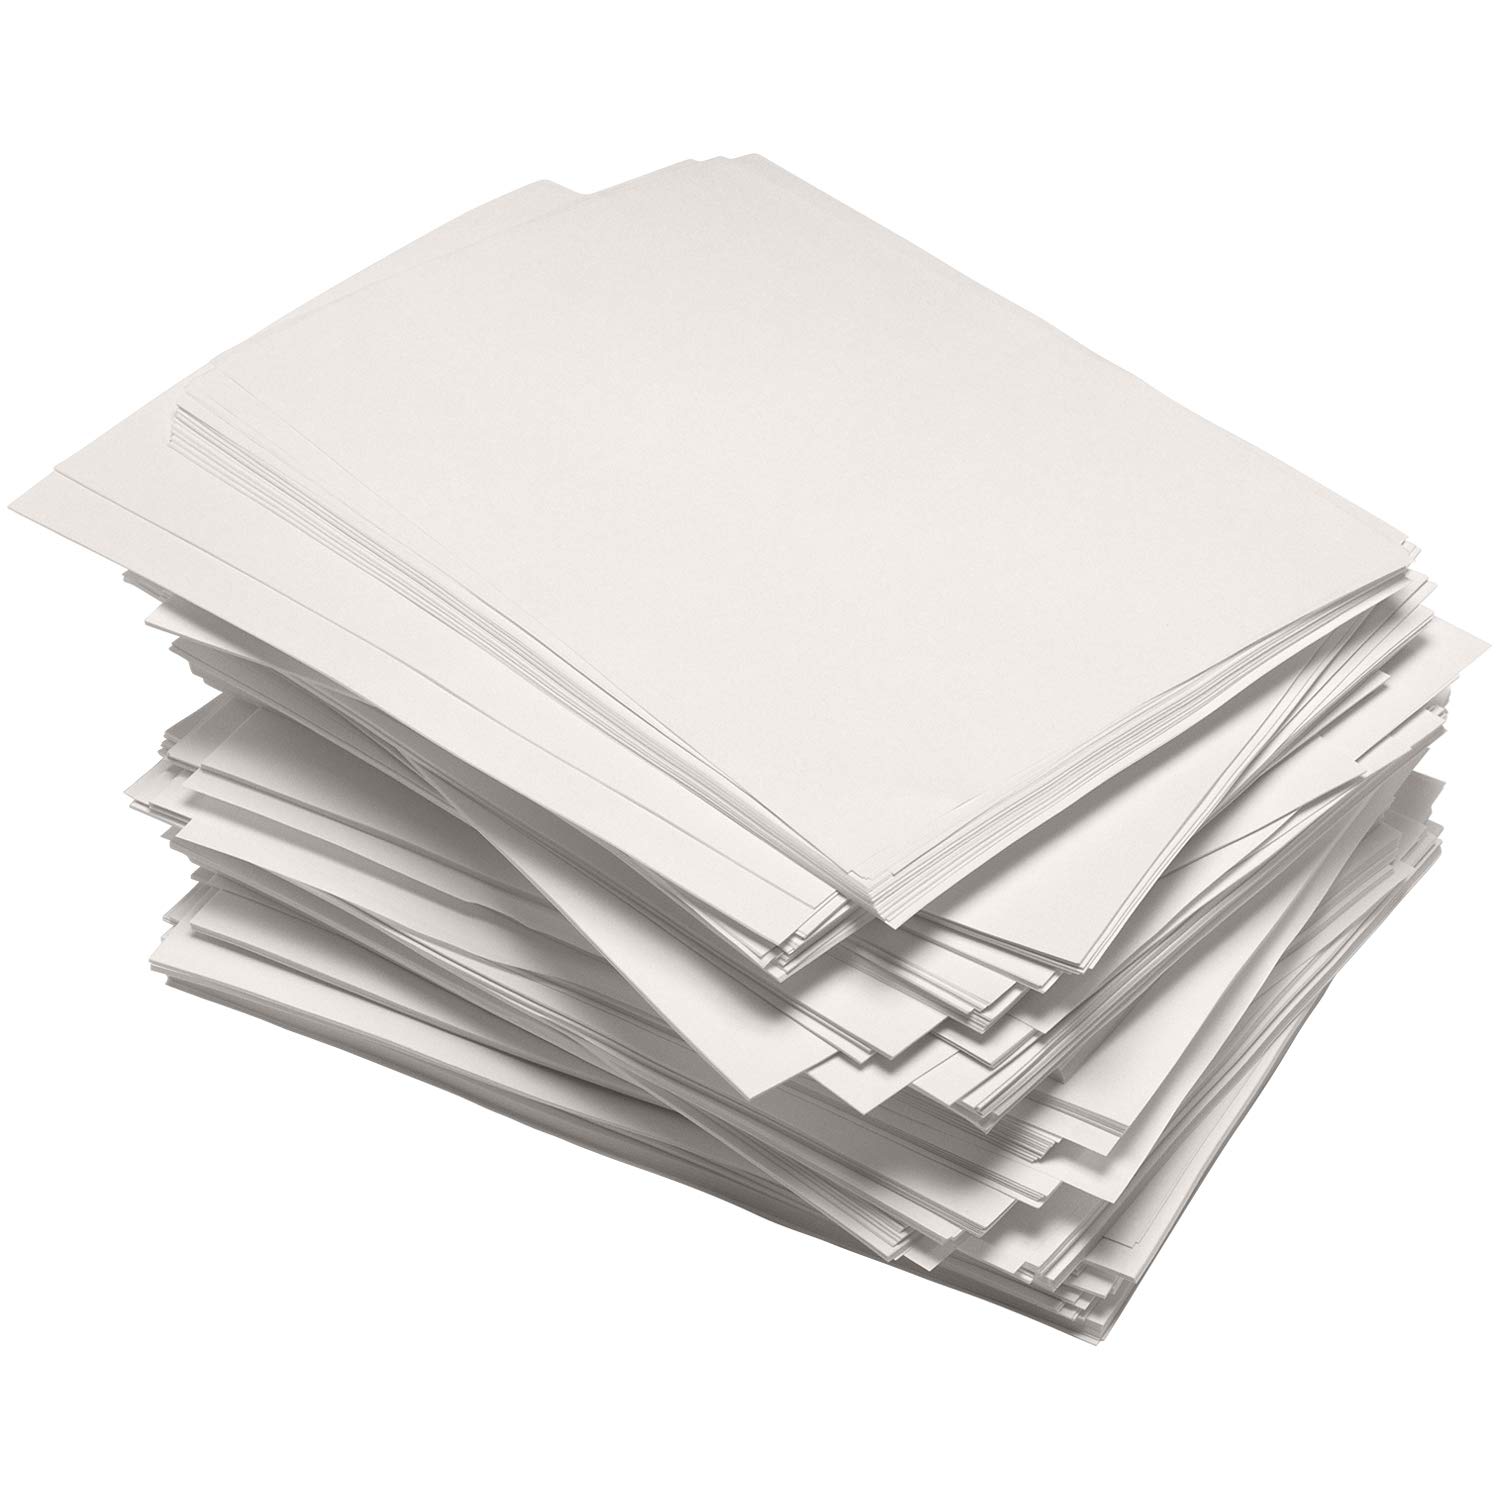 TYH Supplies 50 Pack Newsprint Drawing Paper Printer Friendly Blank 32 lb,  Rough, 8.5 x 11 Inches 8.5 x 11 Inch - 50 Pack